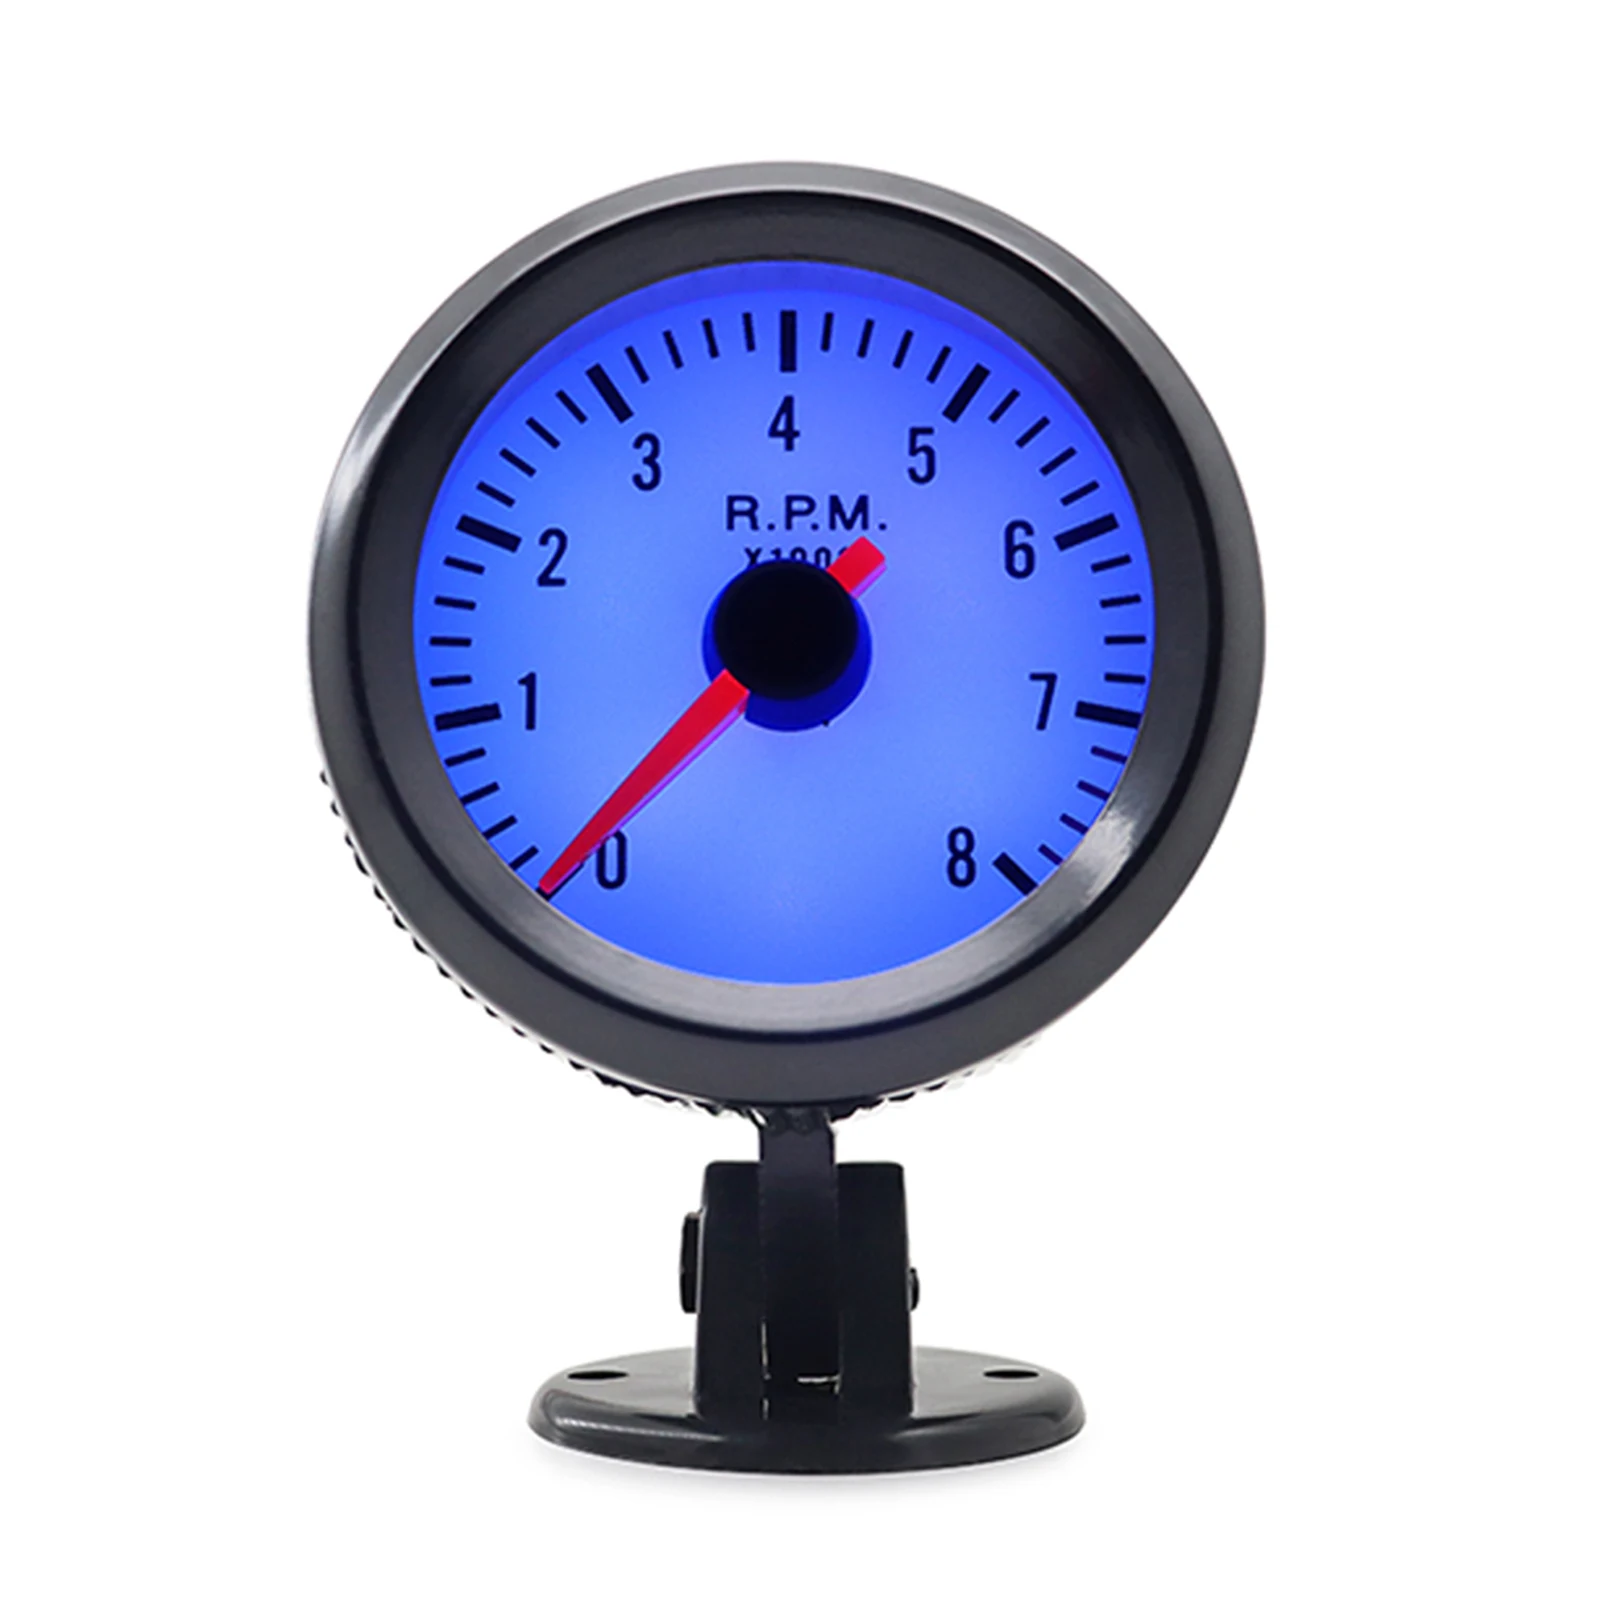 Tachometer tach gauge with black holder cup for auto car 2 52mm 0 8000rpm blue led thumb200